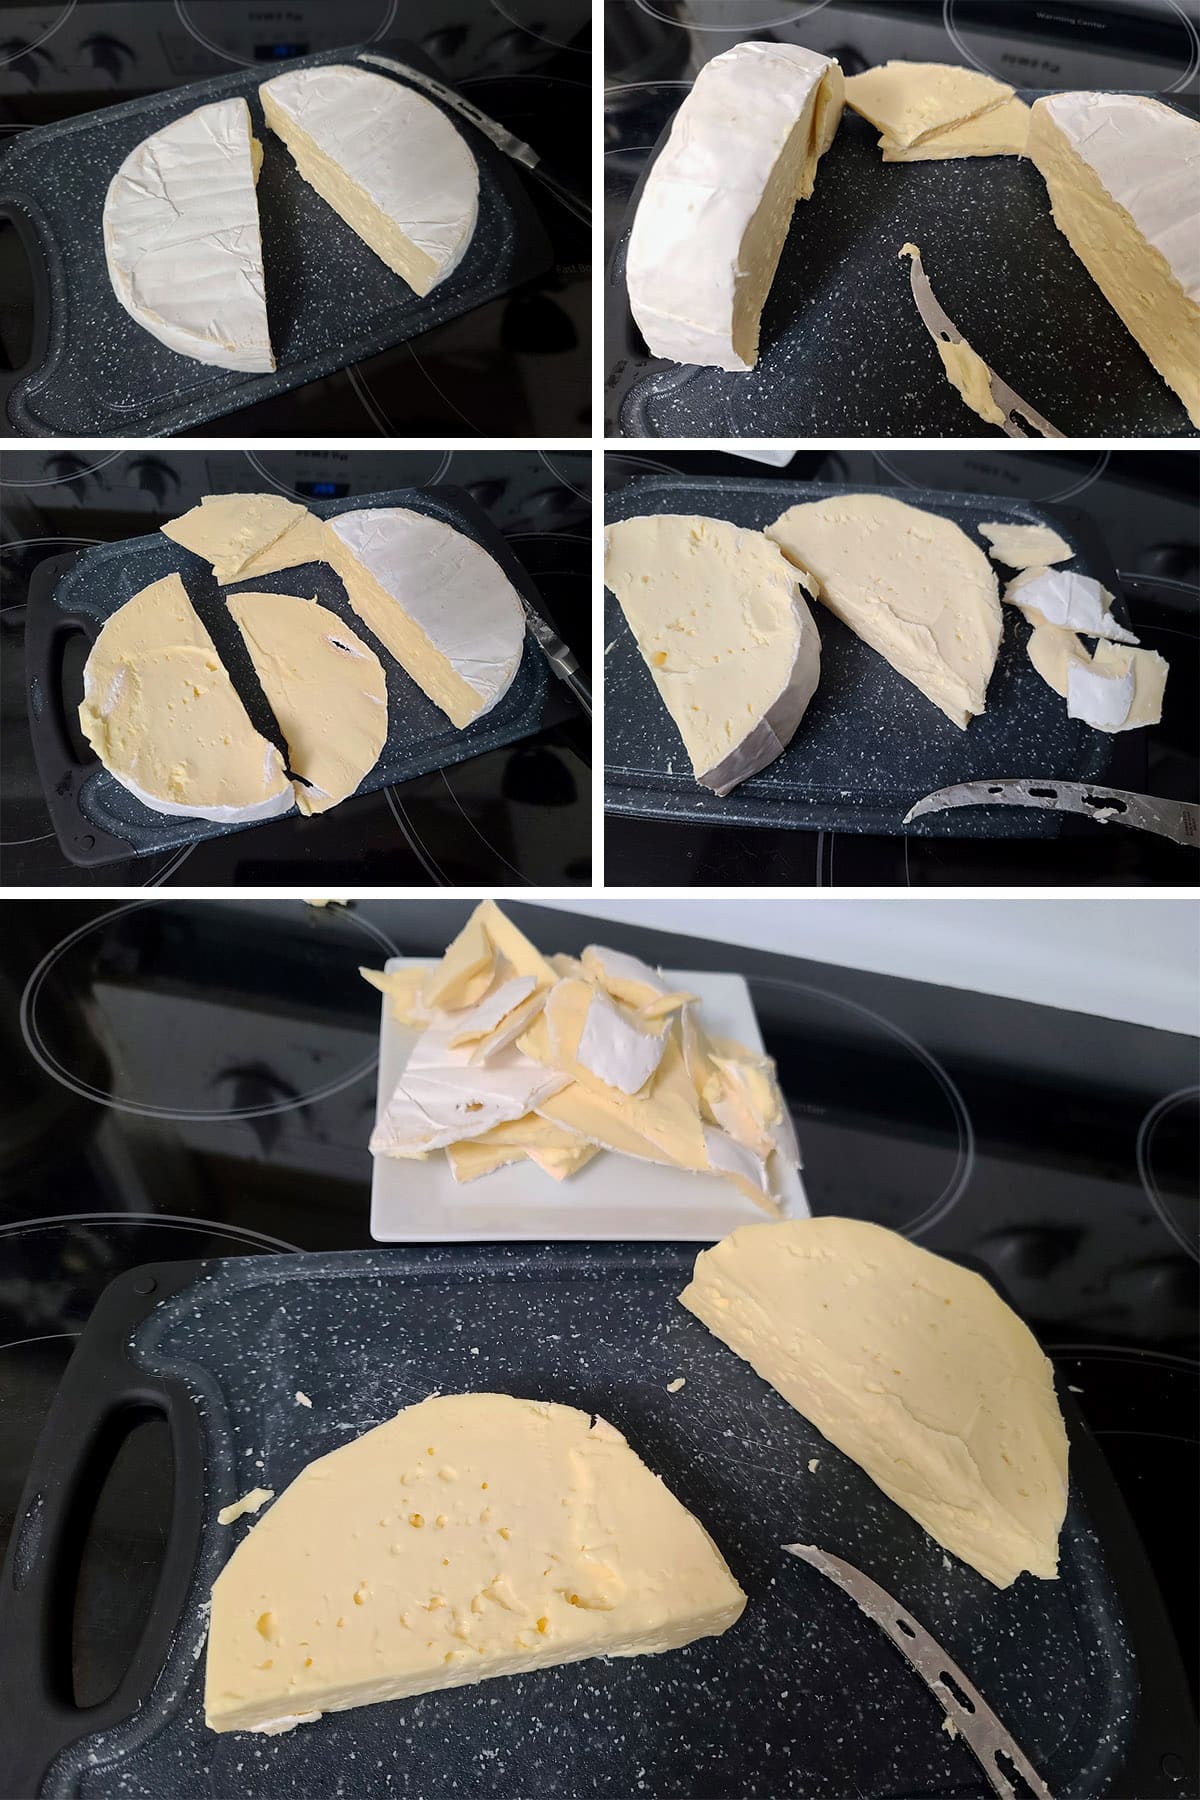 A 5 part image showing the rind being cut off a wheel of brie cheese.